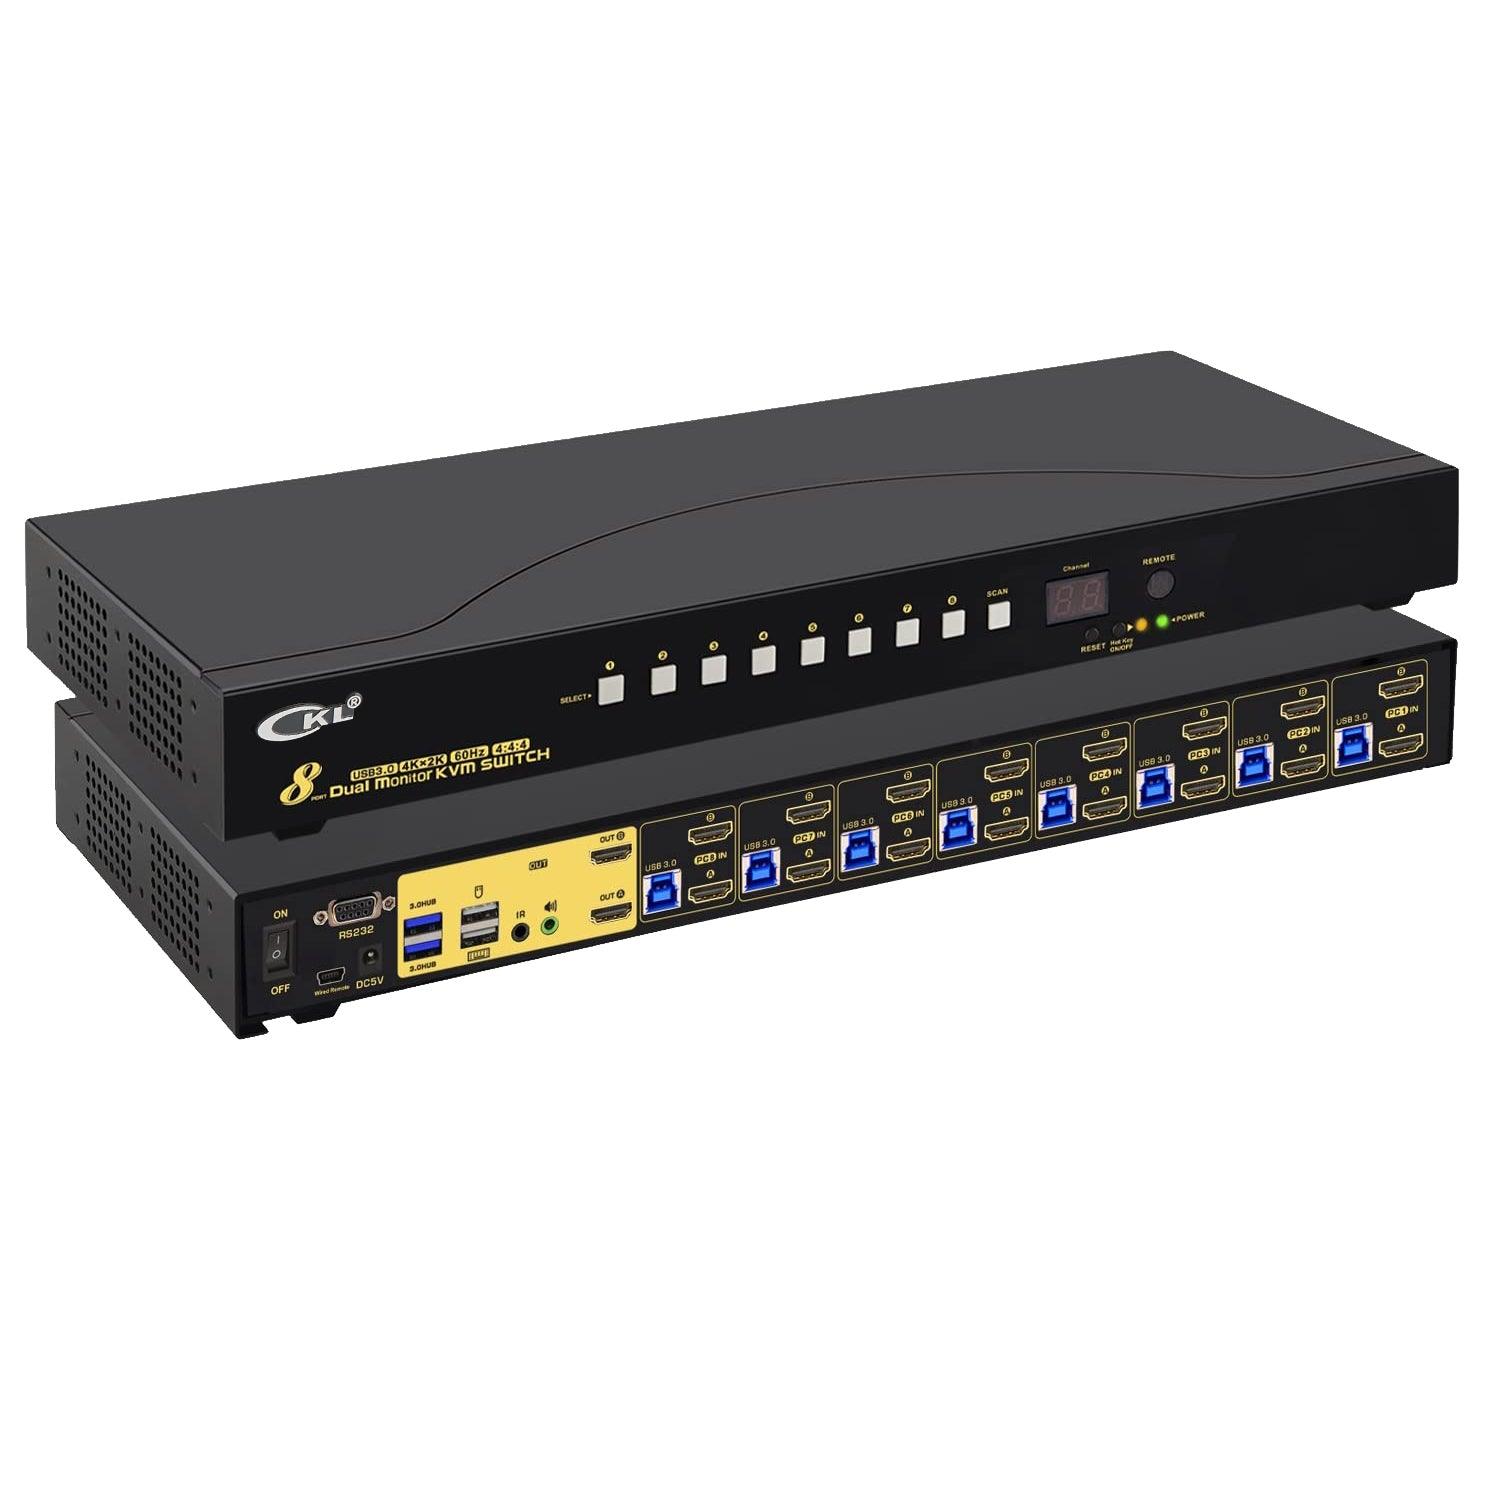 CKL 8 Port USB 3.0 Rack Mount HDMI KVM Switch Dual Monitor 4K@60Hz with Audio, 2 Integrated USB 3.0 Hub and Cables, Keyboard Mouse Hotkey Switcher Box Supports IR Remote （CKL-9238H-3) - CKL KVM Switches